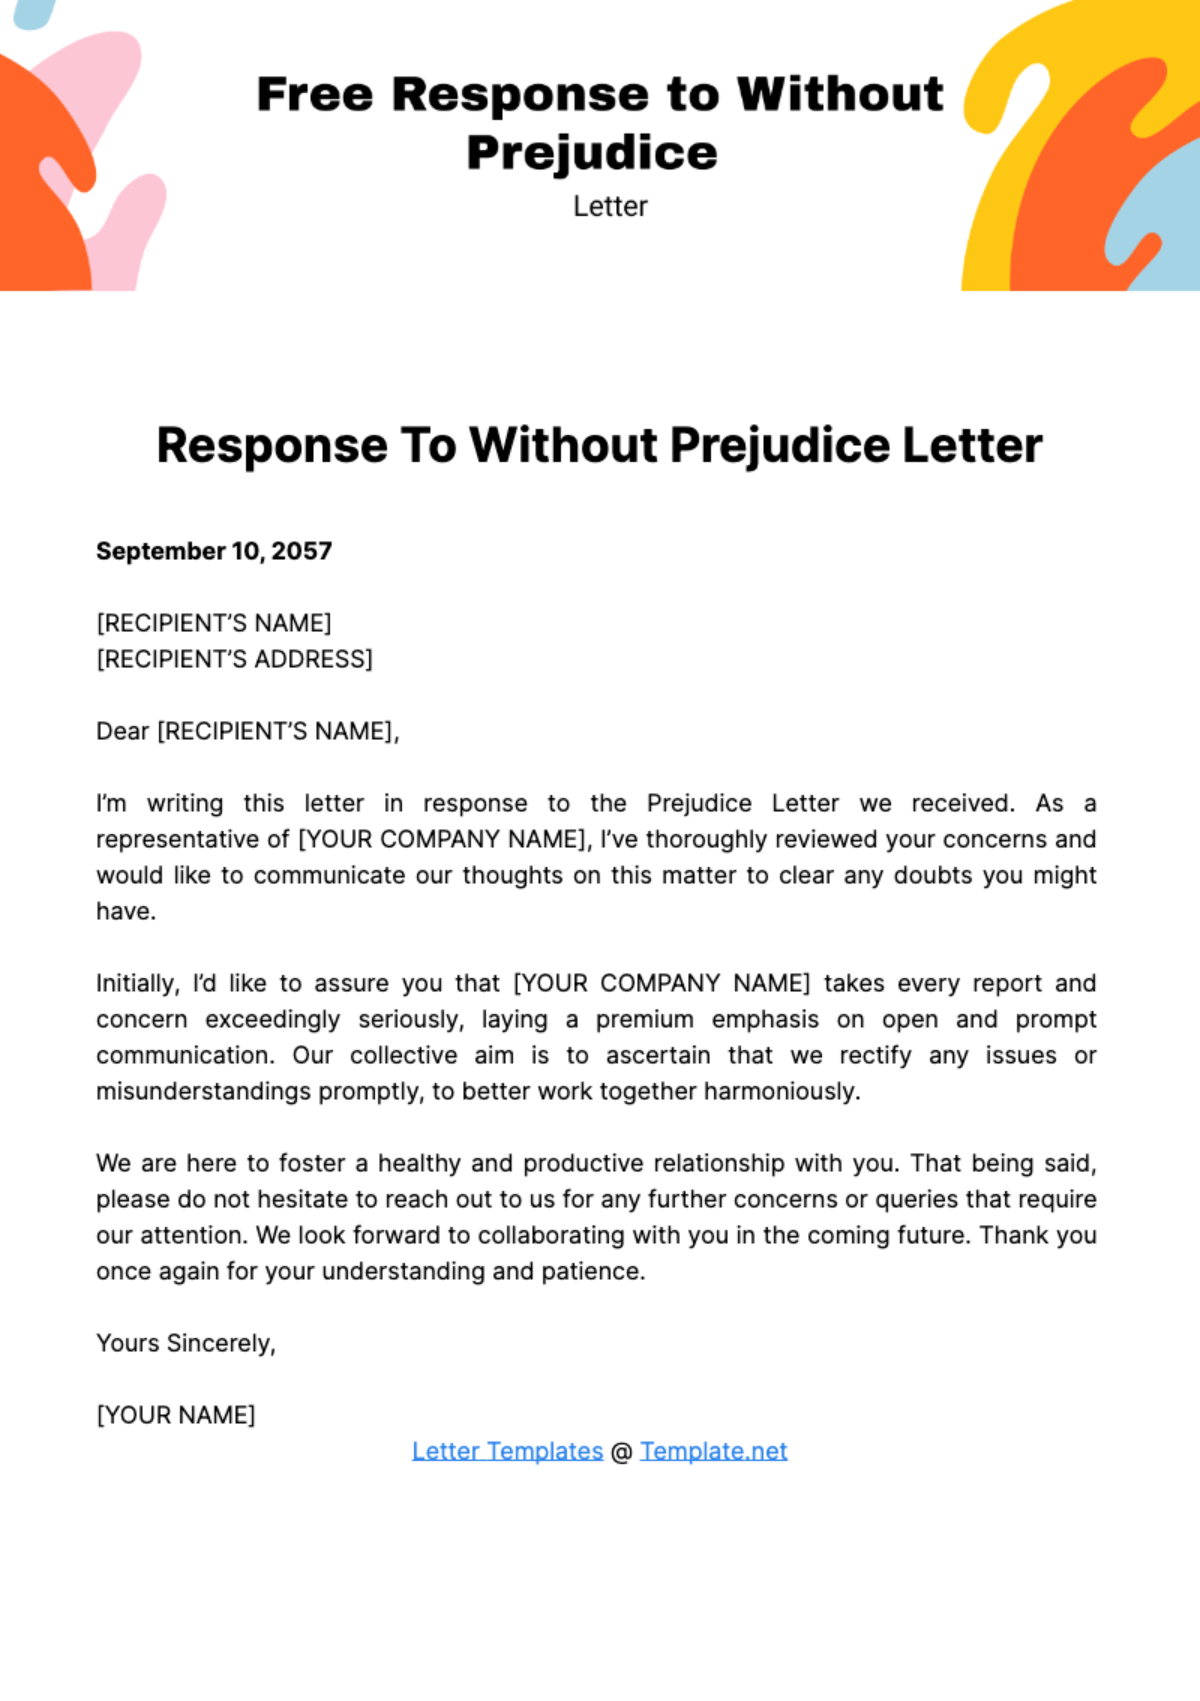 Response to Without Prejudice Letter Template